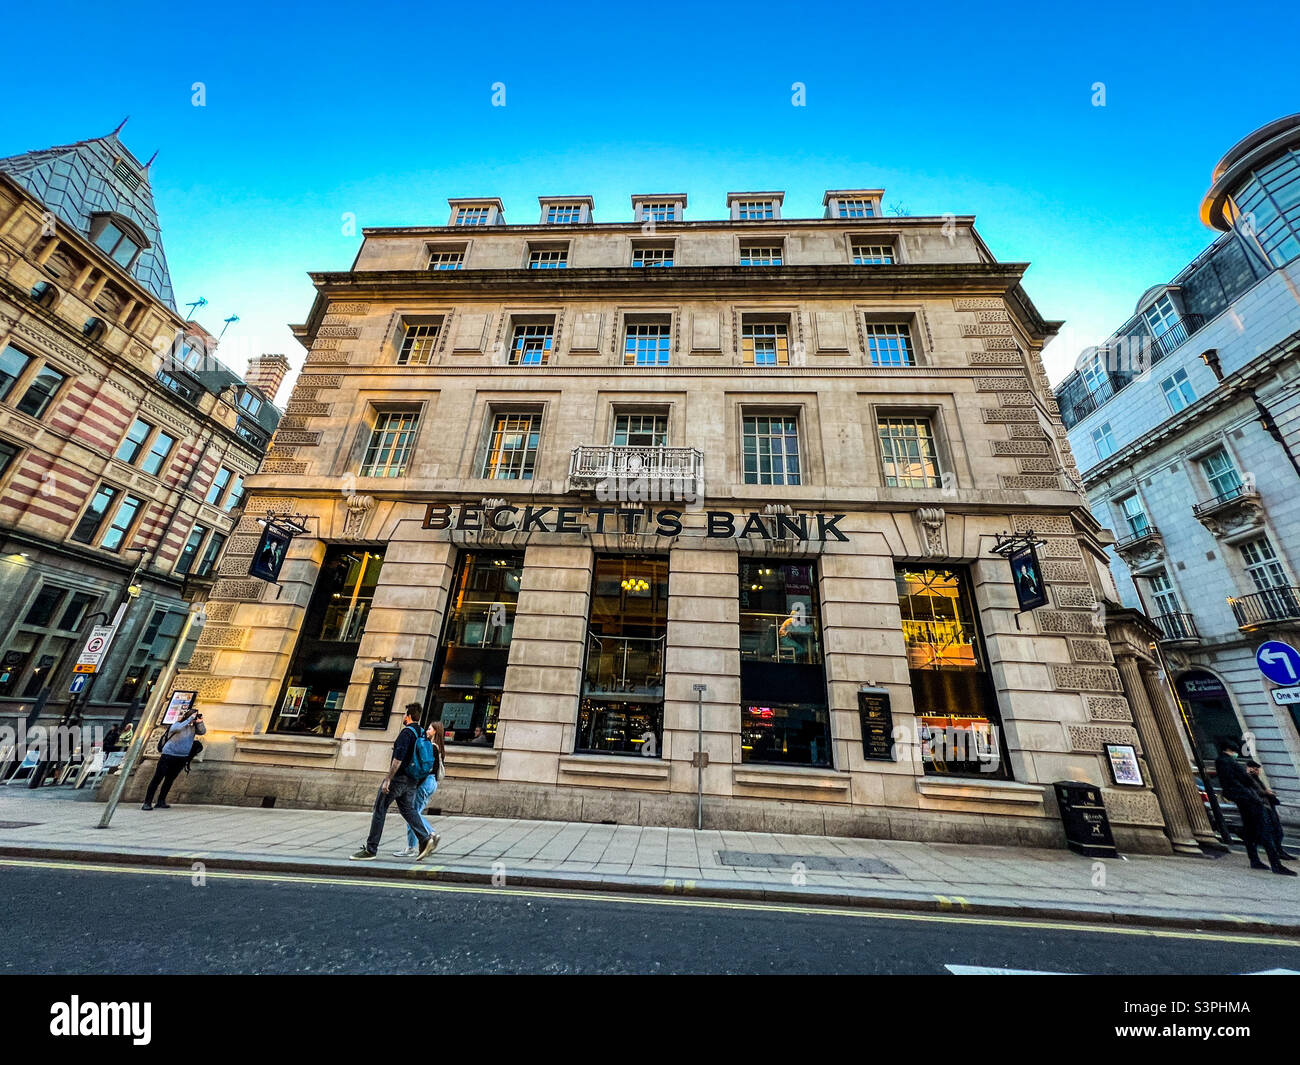 Wetherspoon Beckett’s bank Bar in Leeds city centre Stock Photo